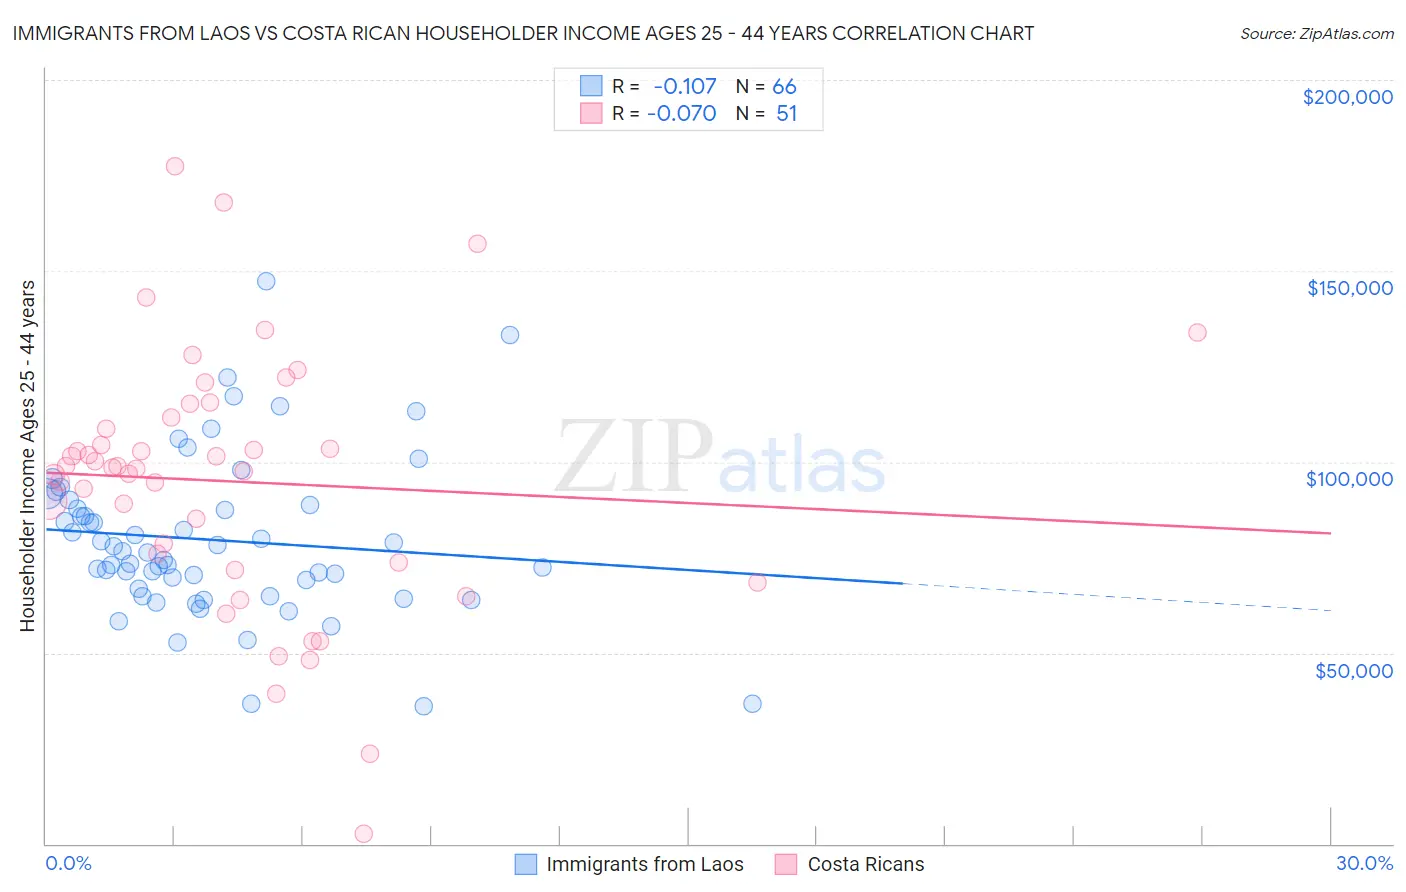 Immigrants from Laos vs Costa Rican Householder Income Ages 25 - 44 years